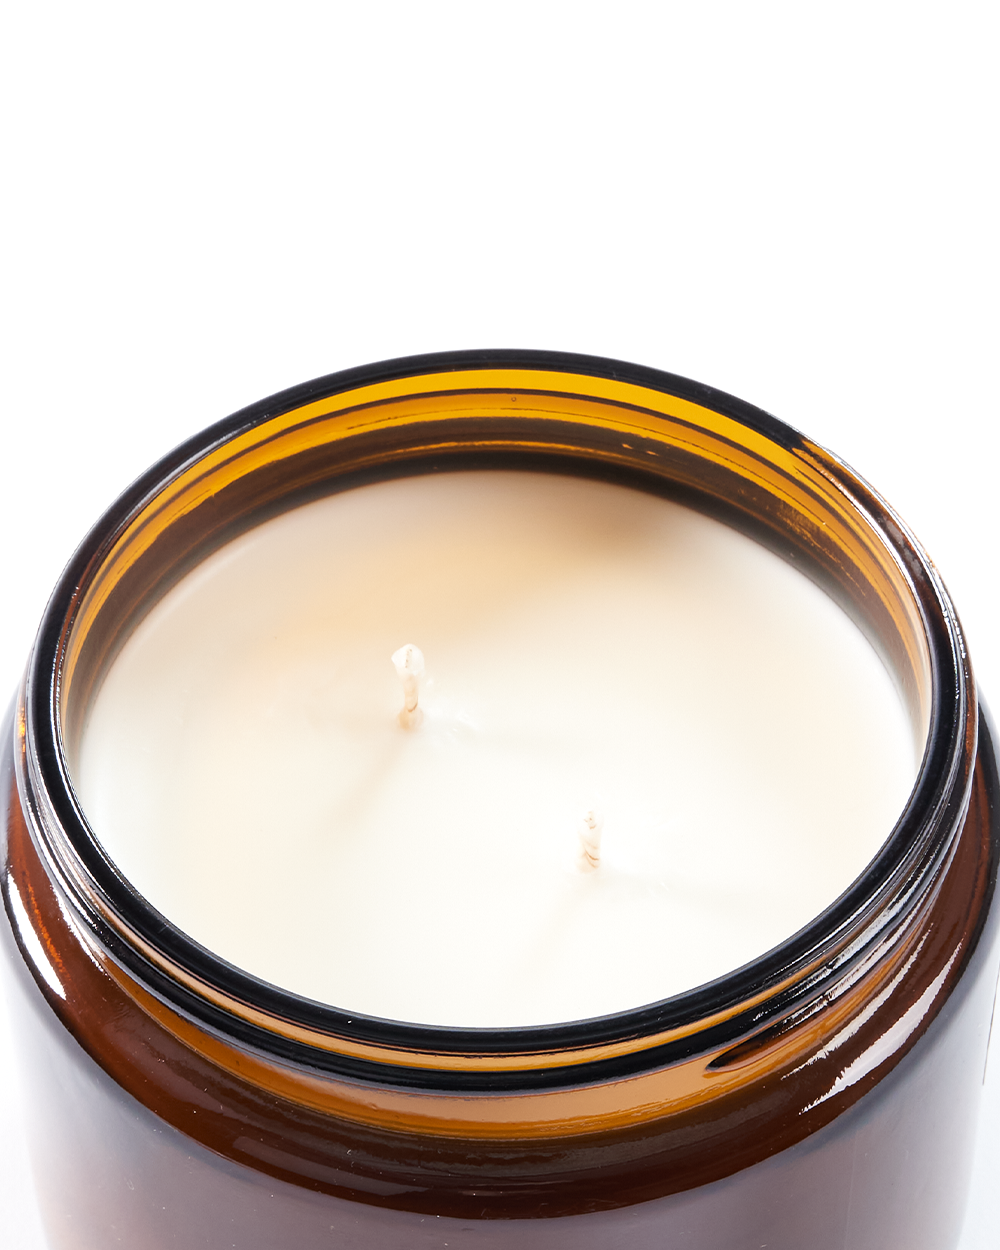 500g Amber Jay Soy Candle - FIR